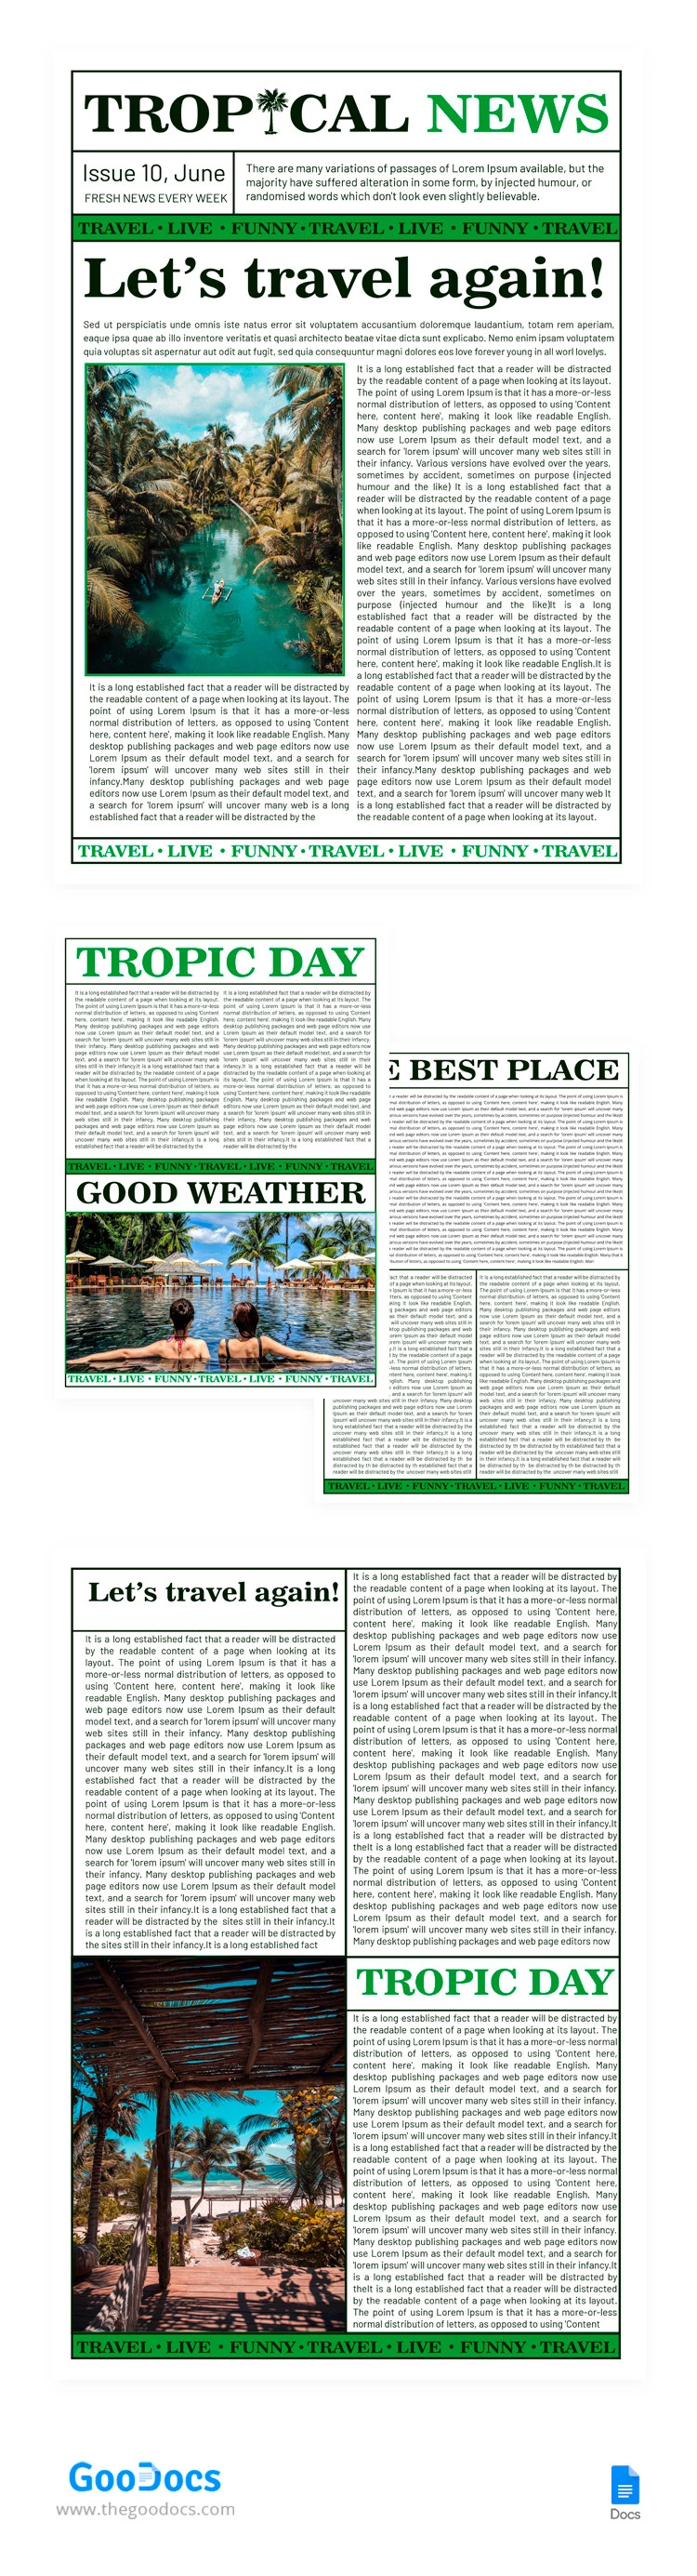 Giornale tropicale - free Google Docs Template - 10065441